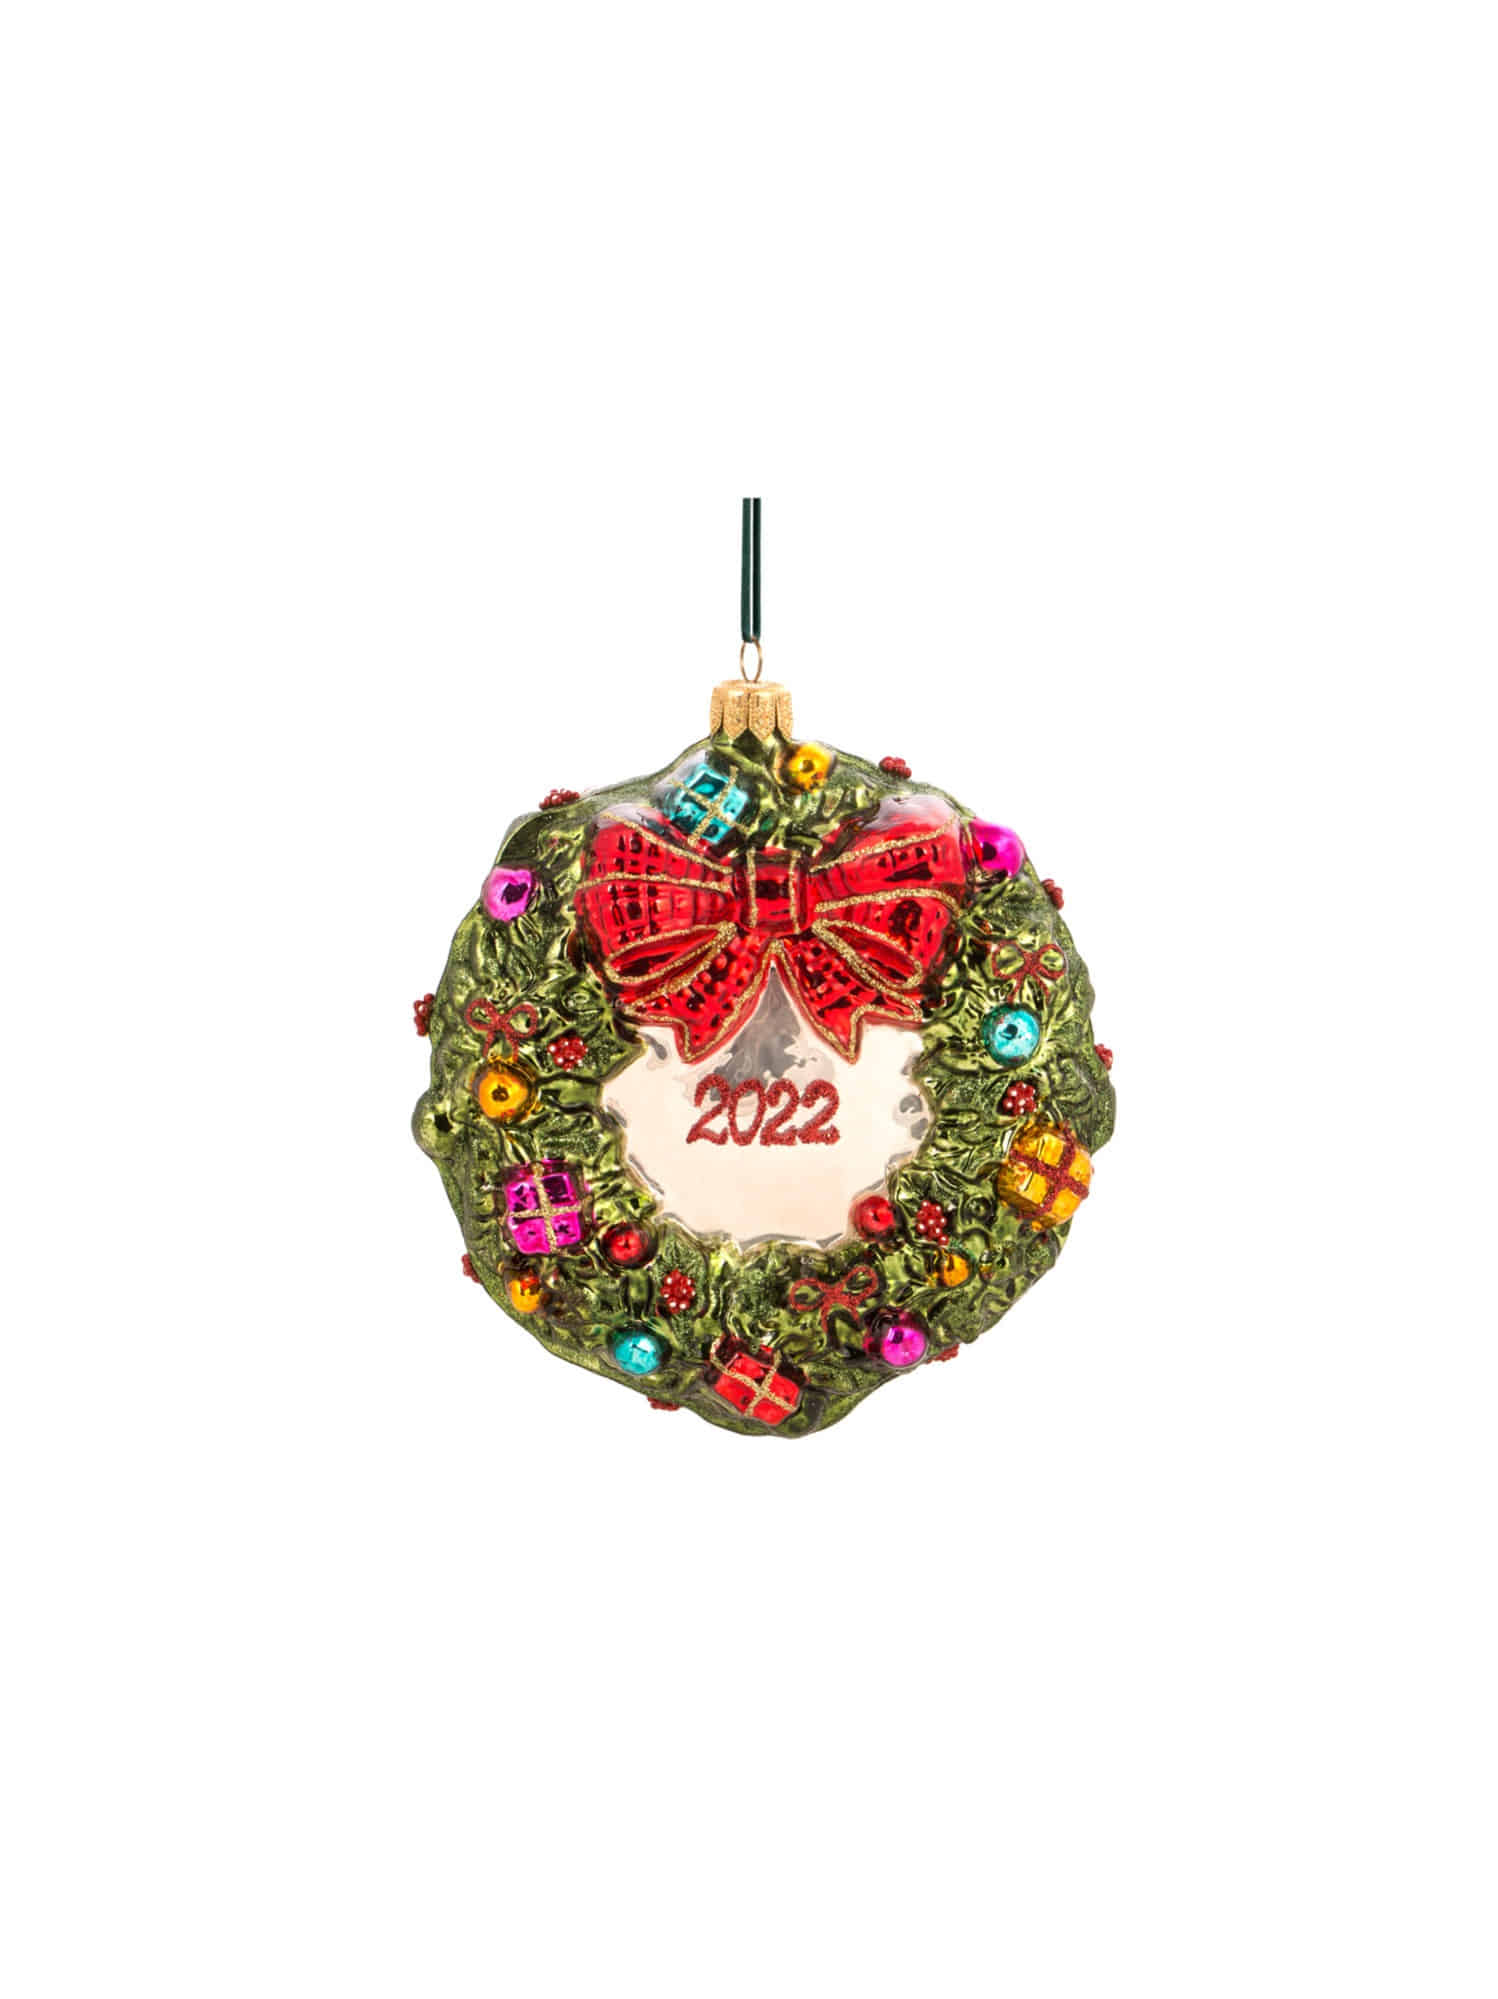 WREATH WITH PRESENTS ORNAMENT